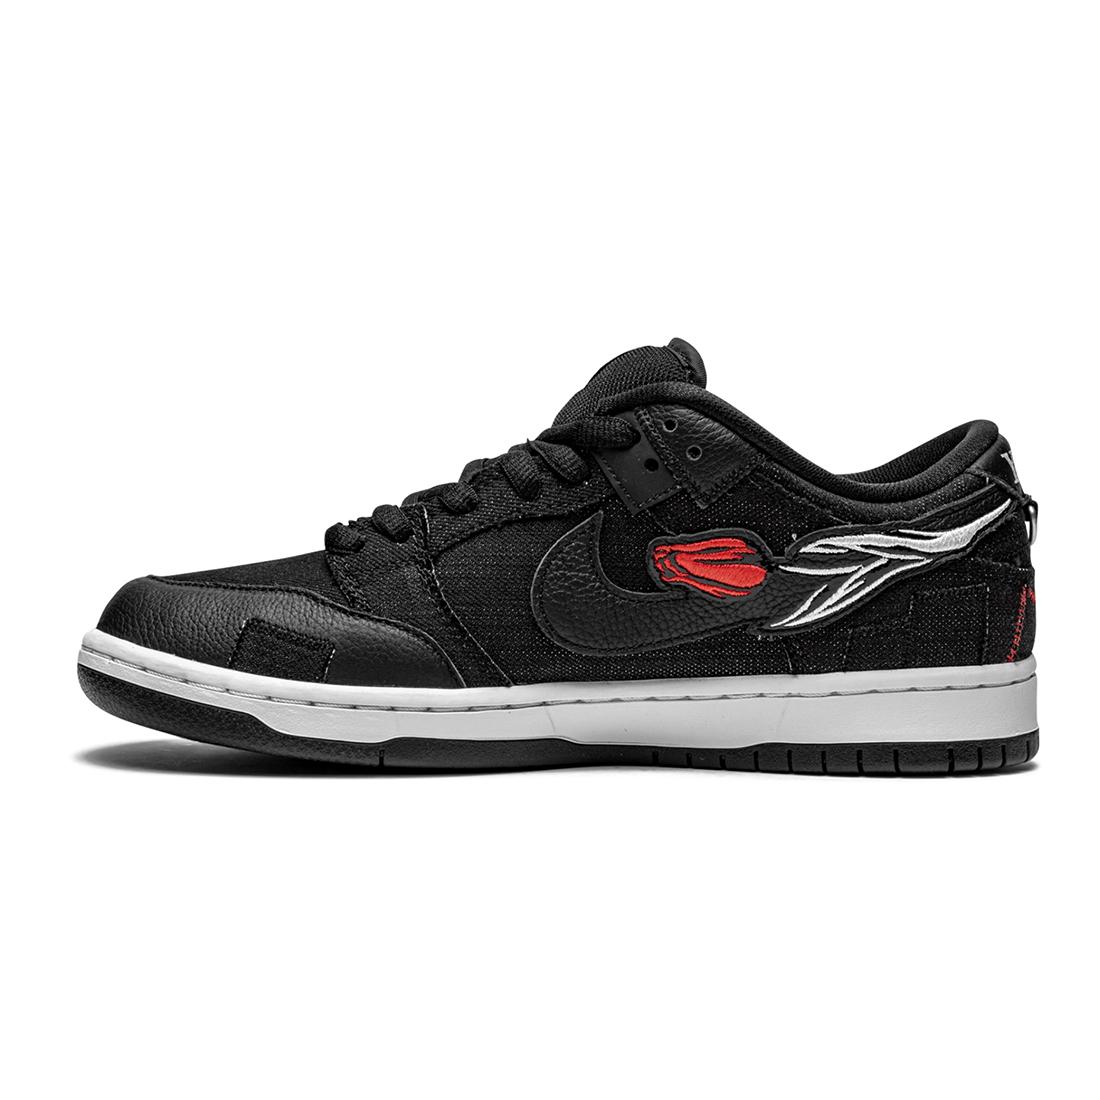 NIKE SB DUNK LOW Wasted Youth